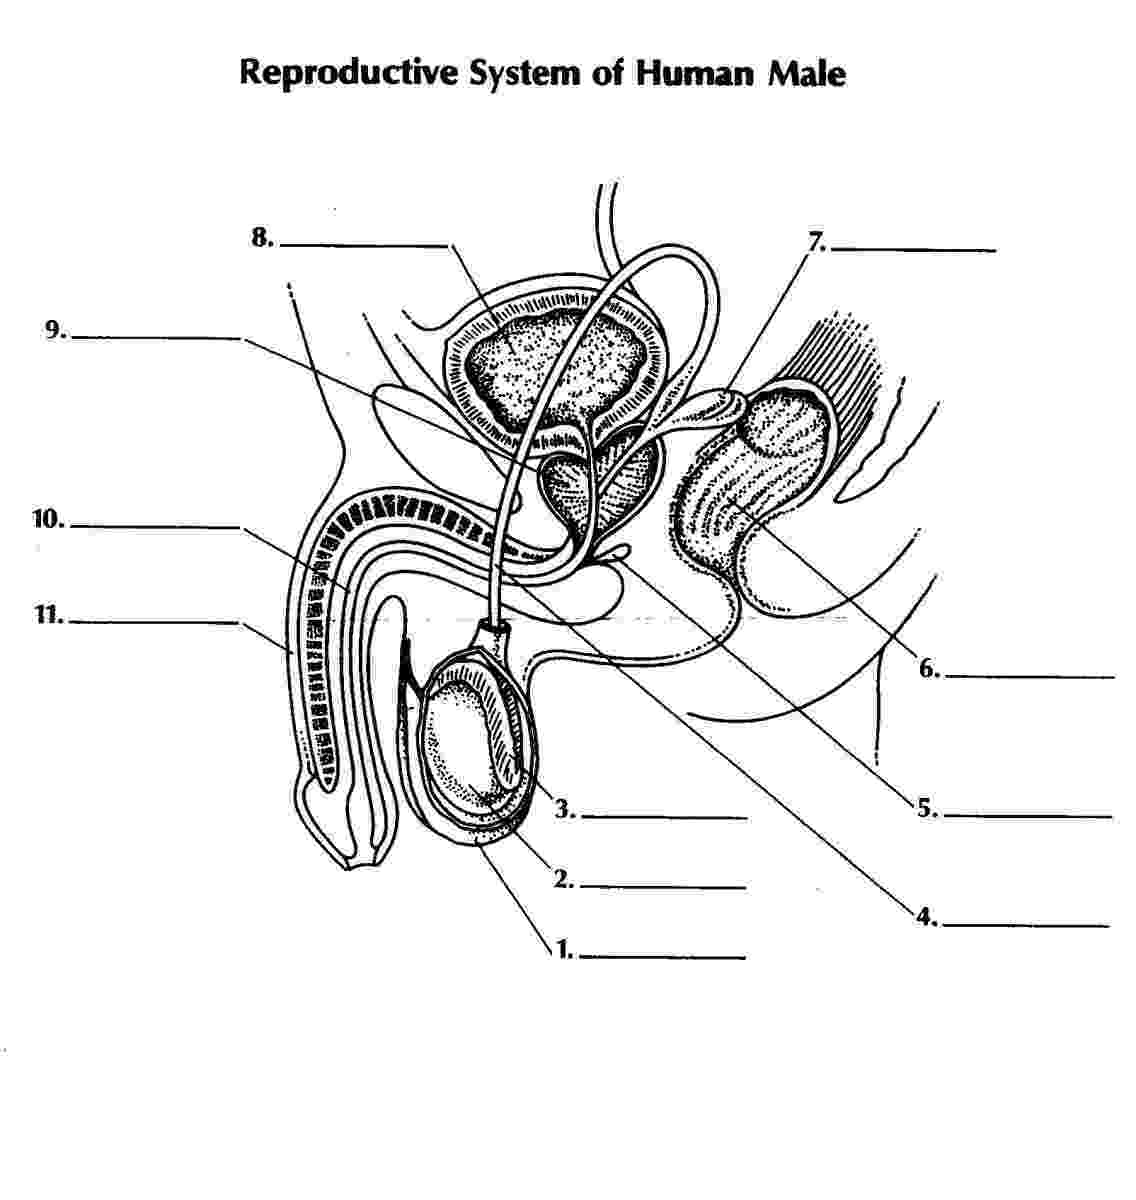 the male reproductive system worksheet the human reproductive system ks3 teaching resources the system worksheet reproductive male 